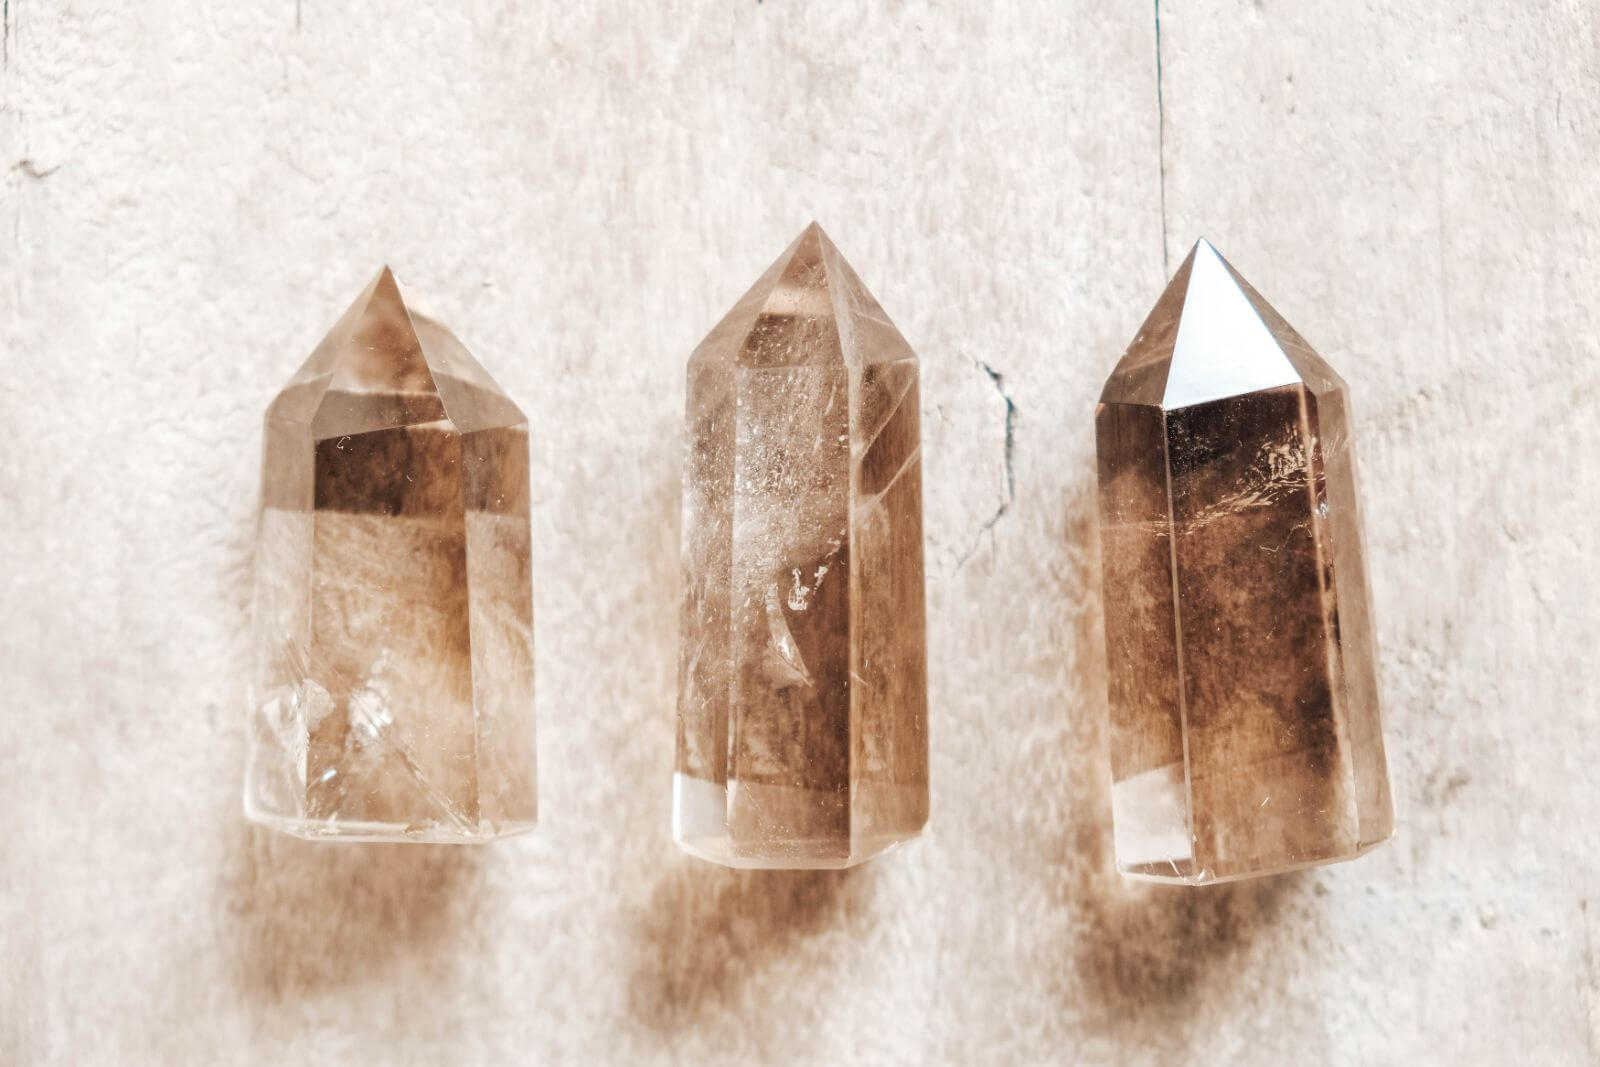 Unlock the Power of Smoky Quartz: Meaning, Healing Properties, and